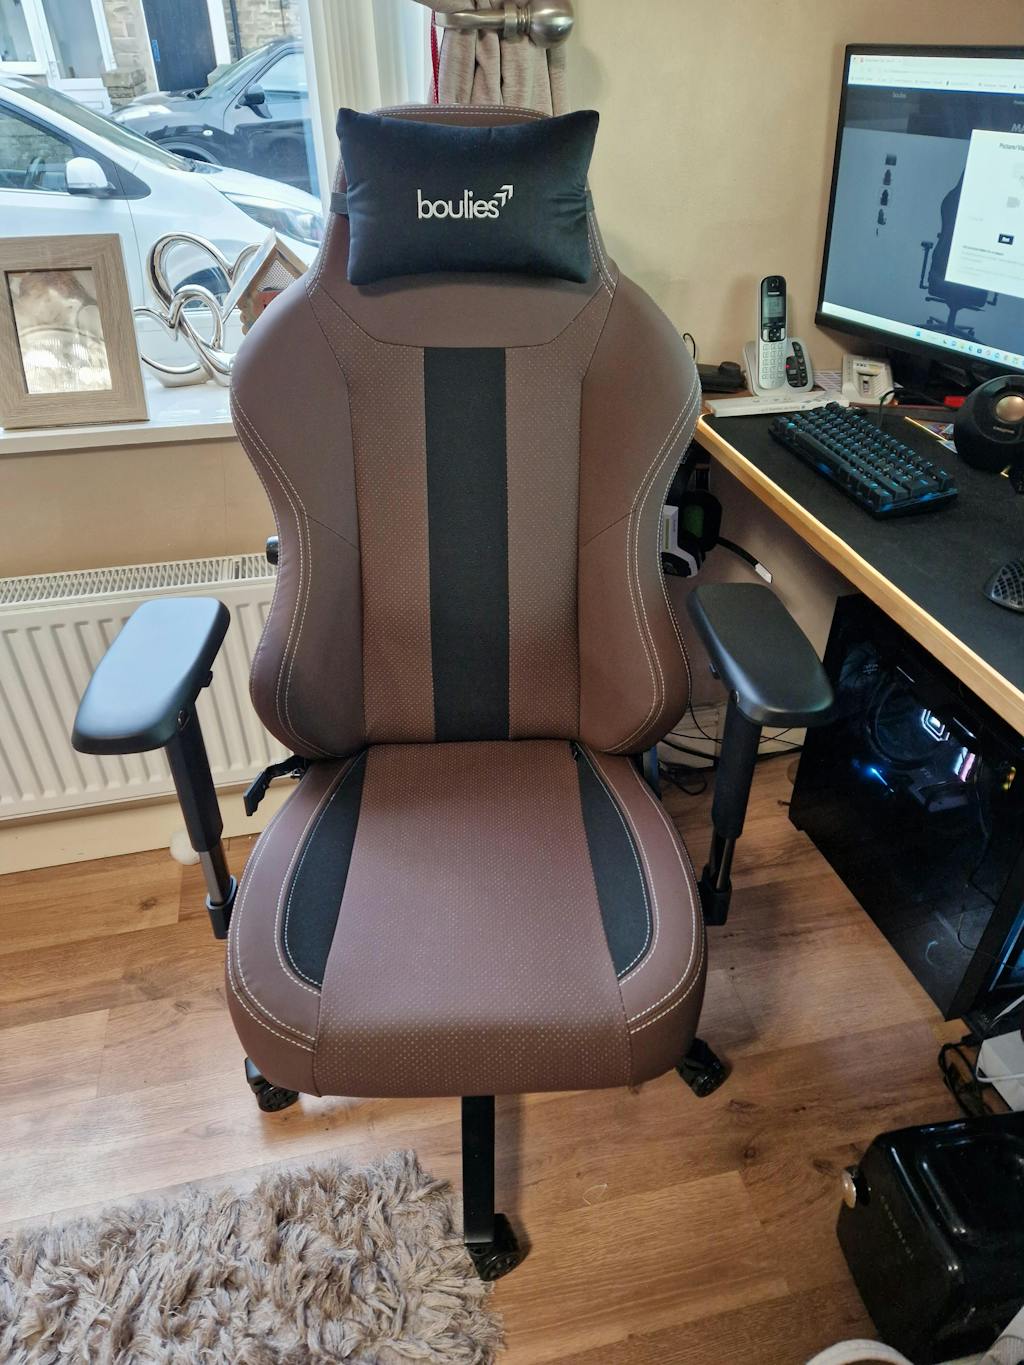 boulies chairs review image